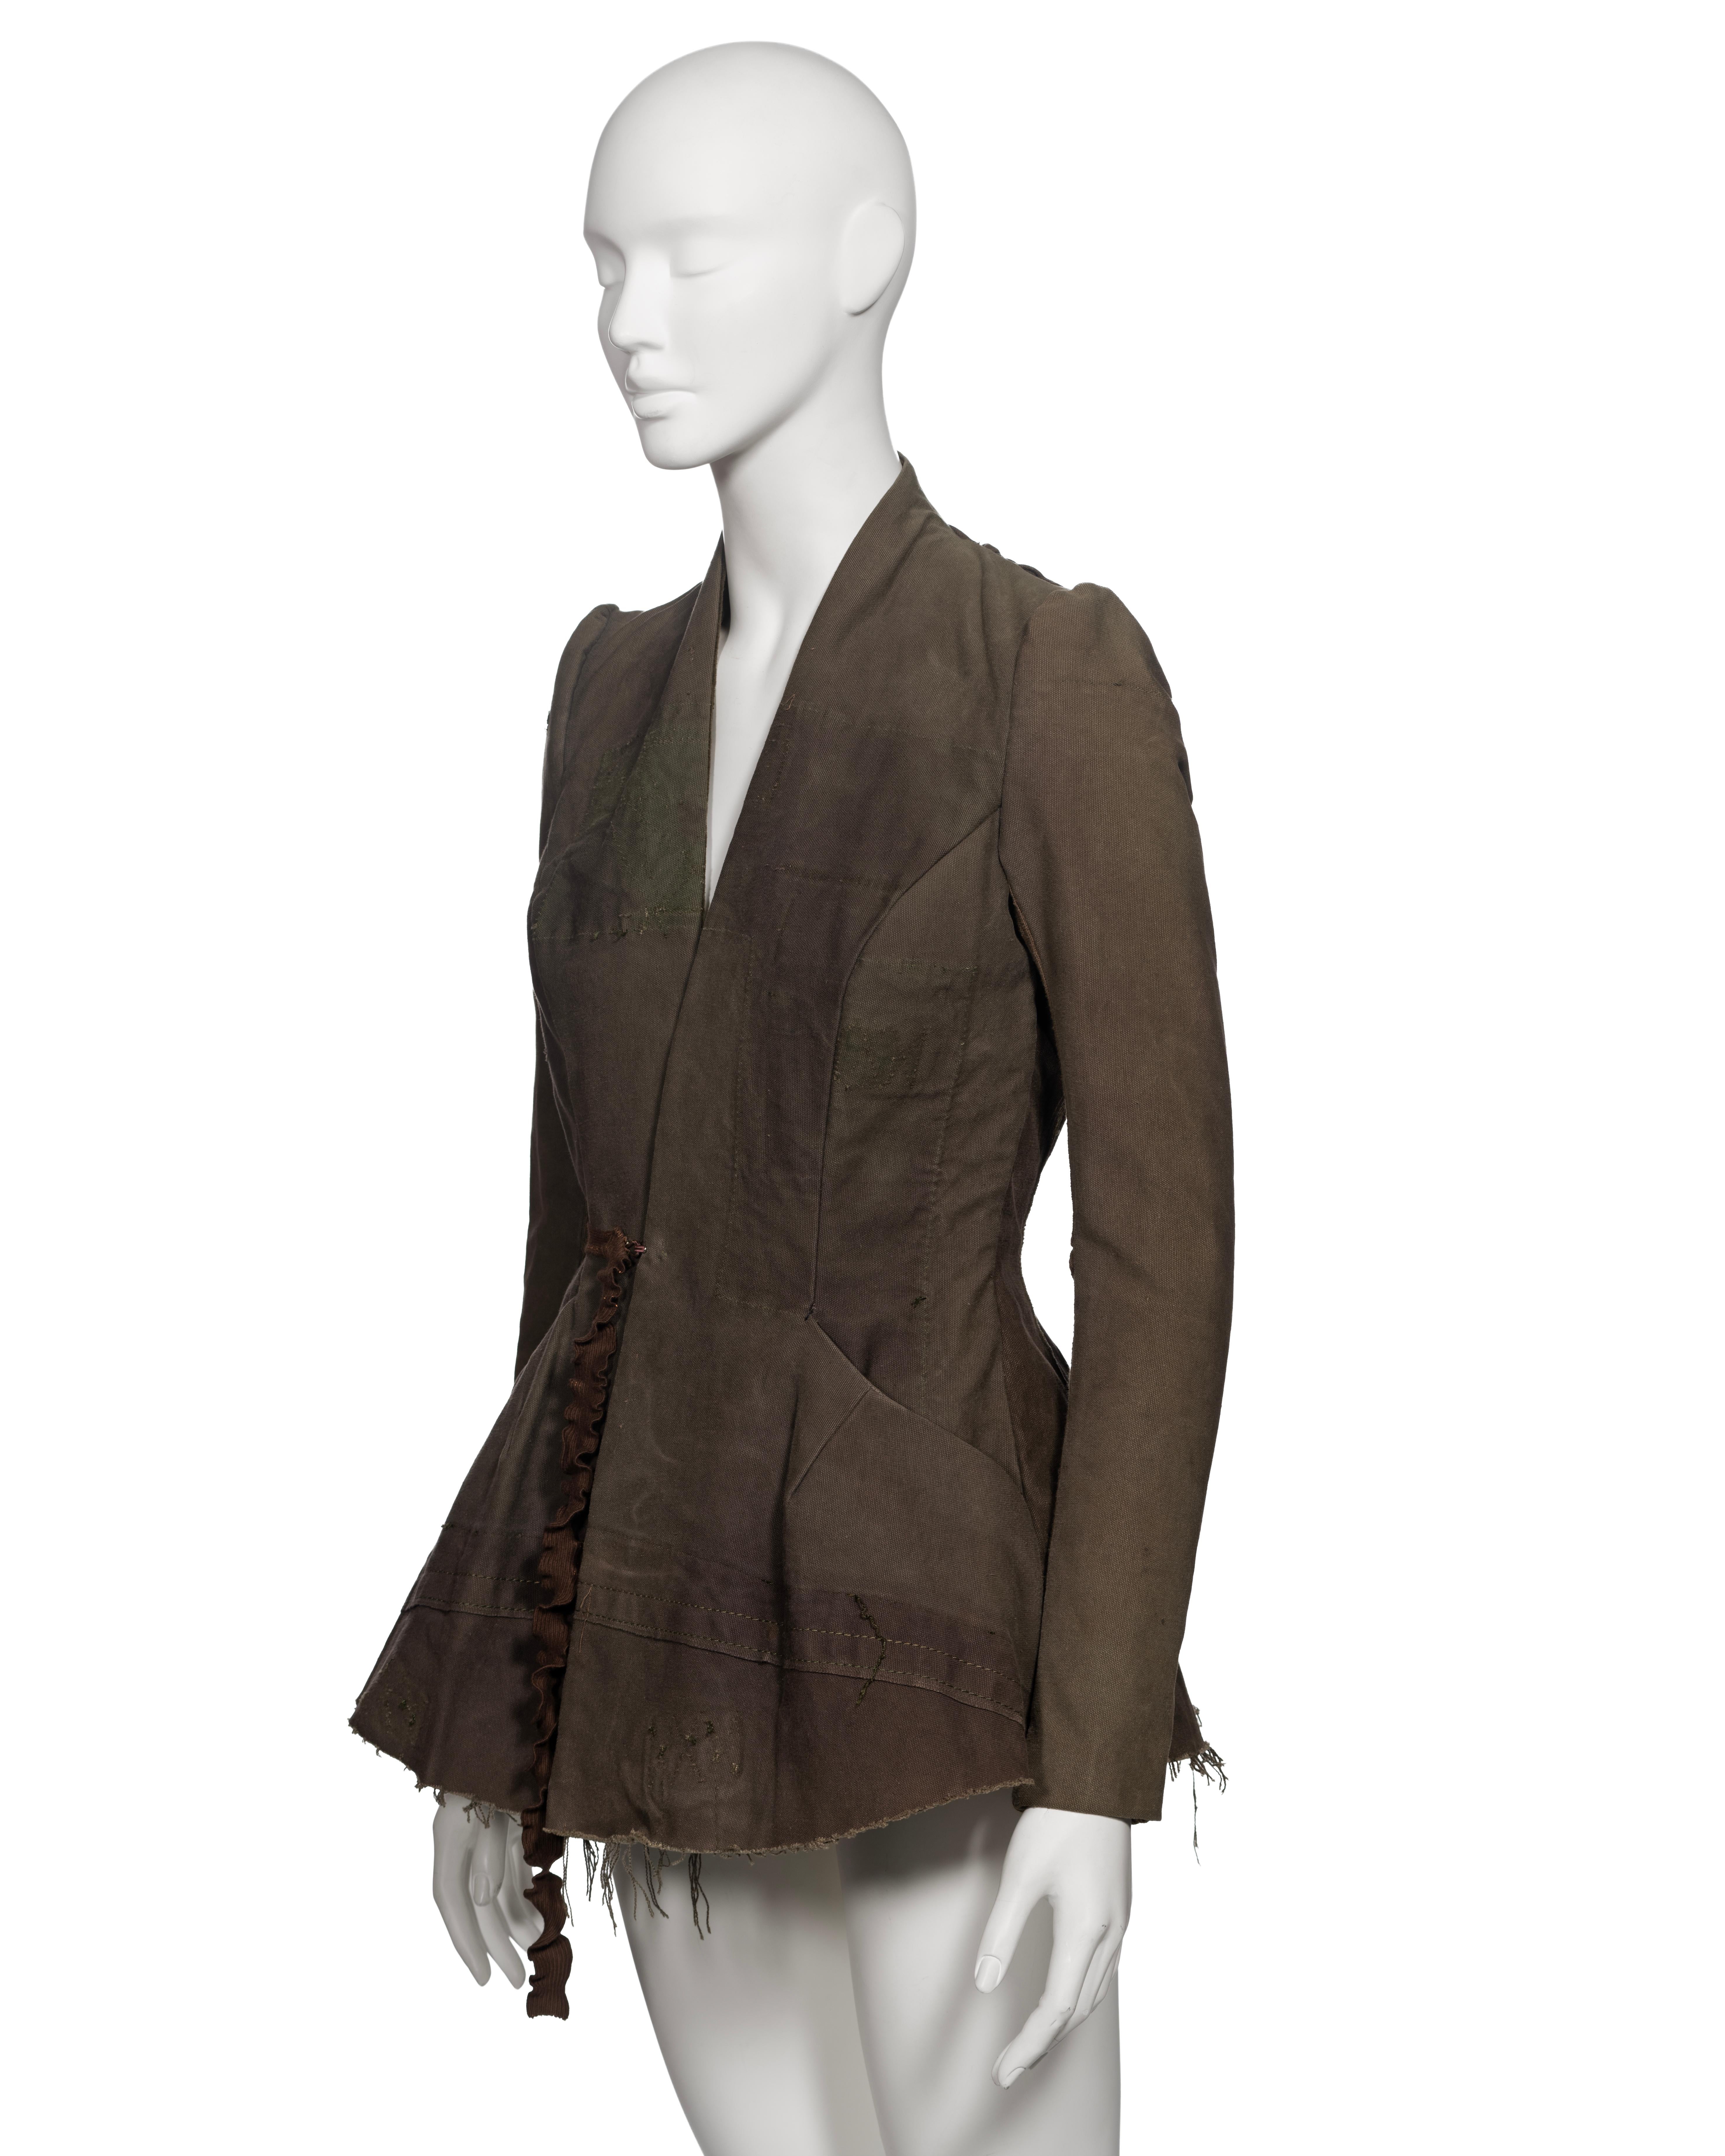 Rick Owens Jacket Made From Deconstructed Military Surplus Bags, c. 1998 12